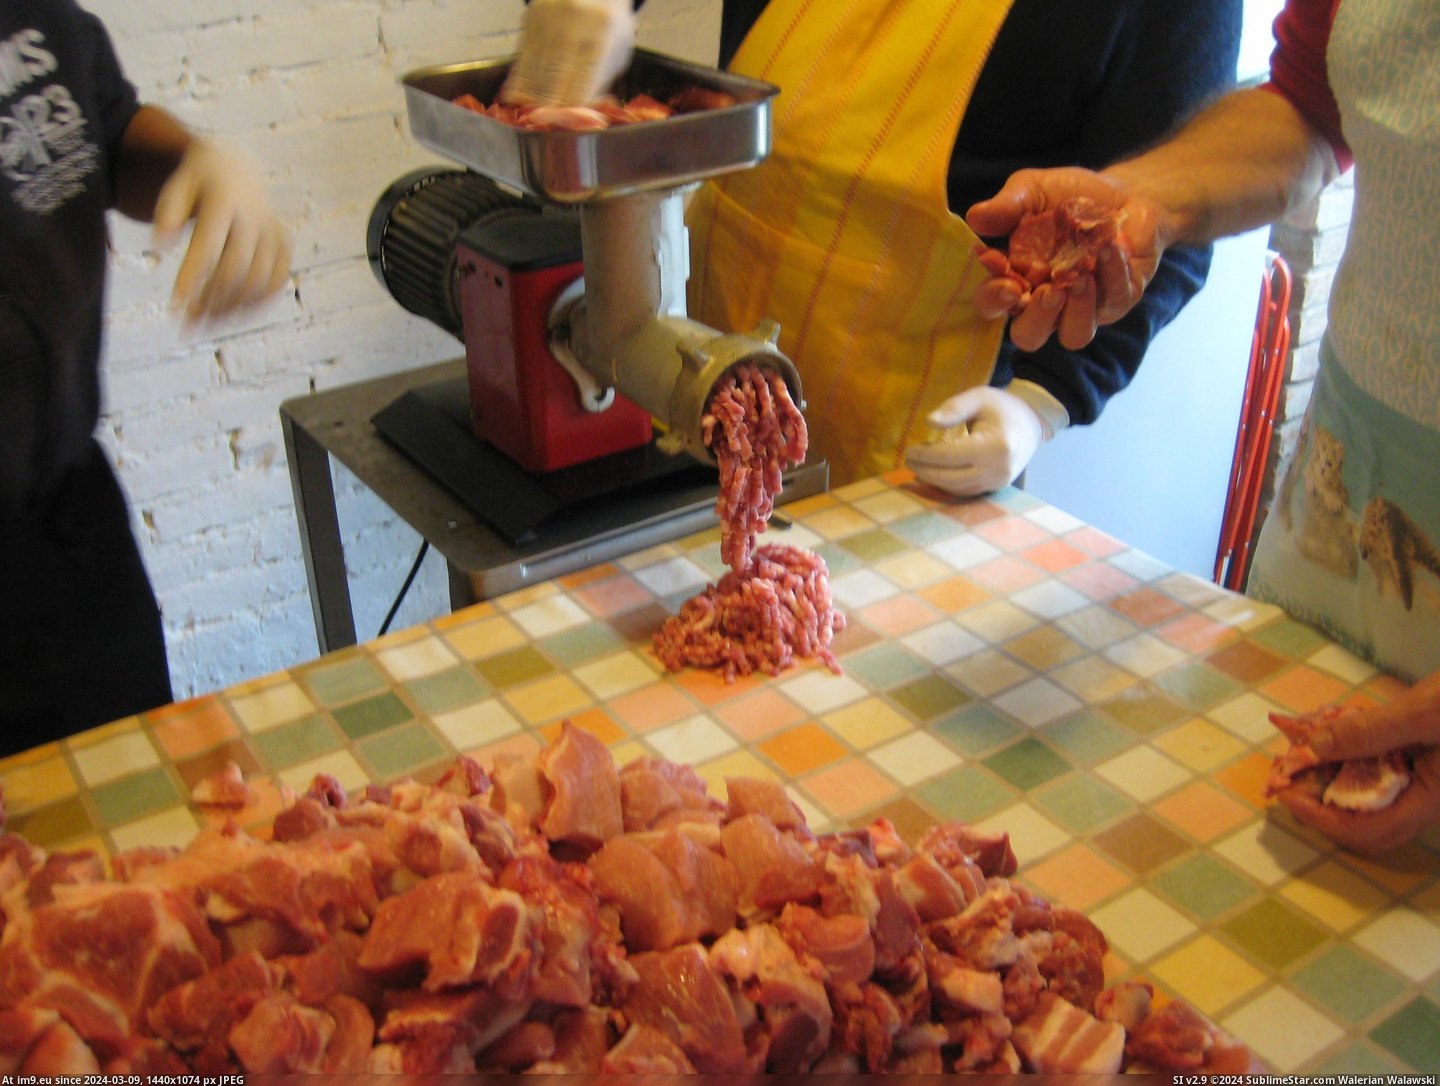 #Making #Homemade #Italy [Pics] Making homemade salami in Italy 13 Pic. (Image of album My r/PICS favs))